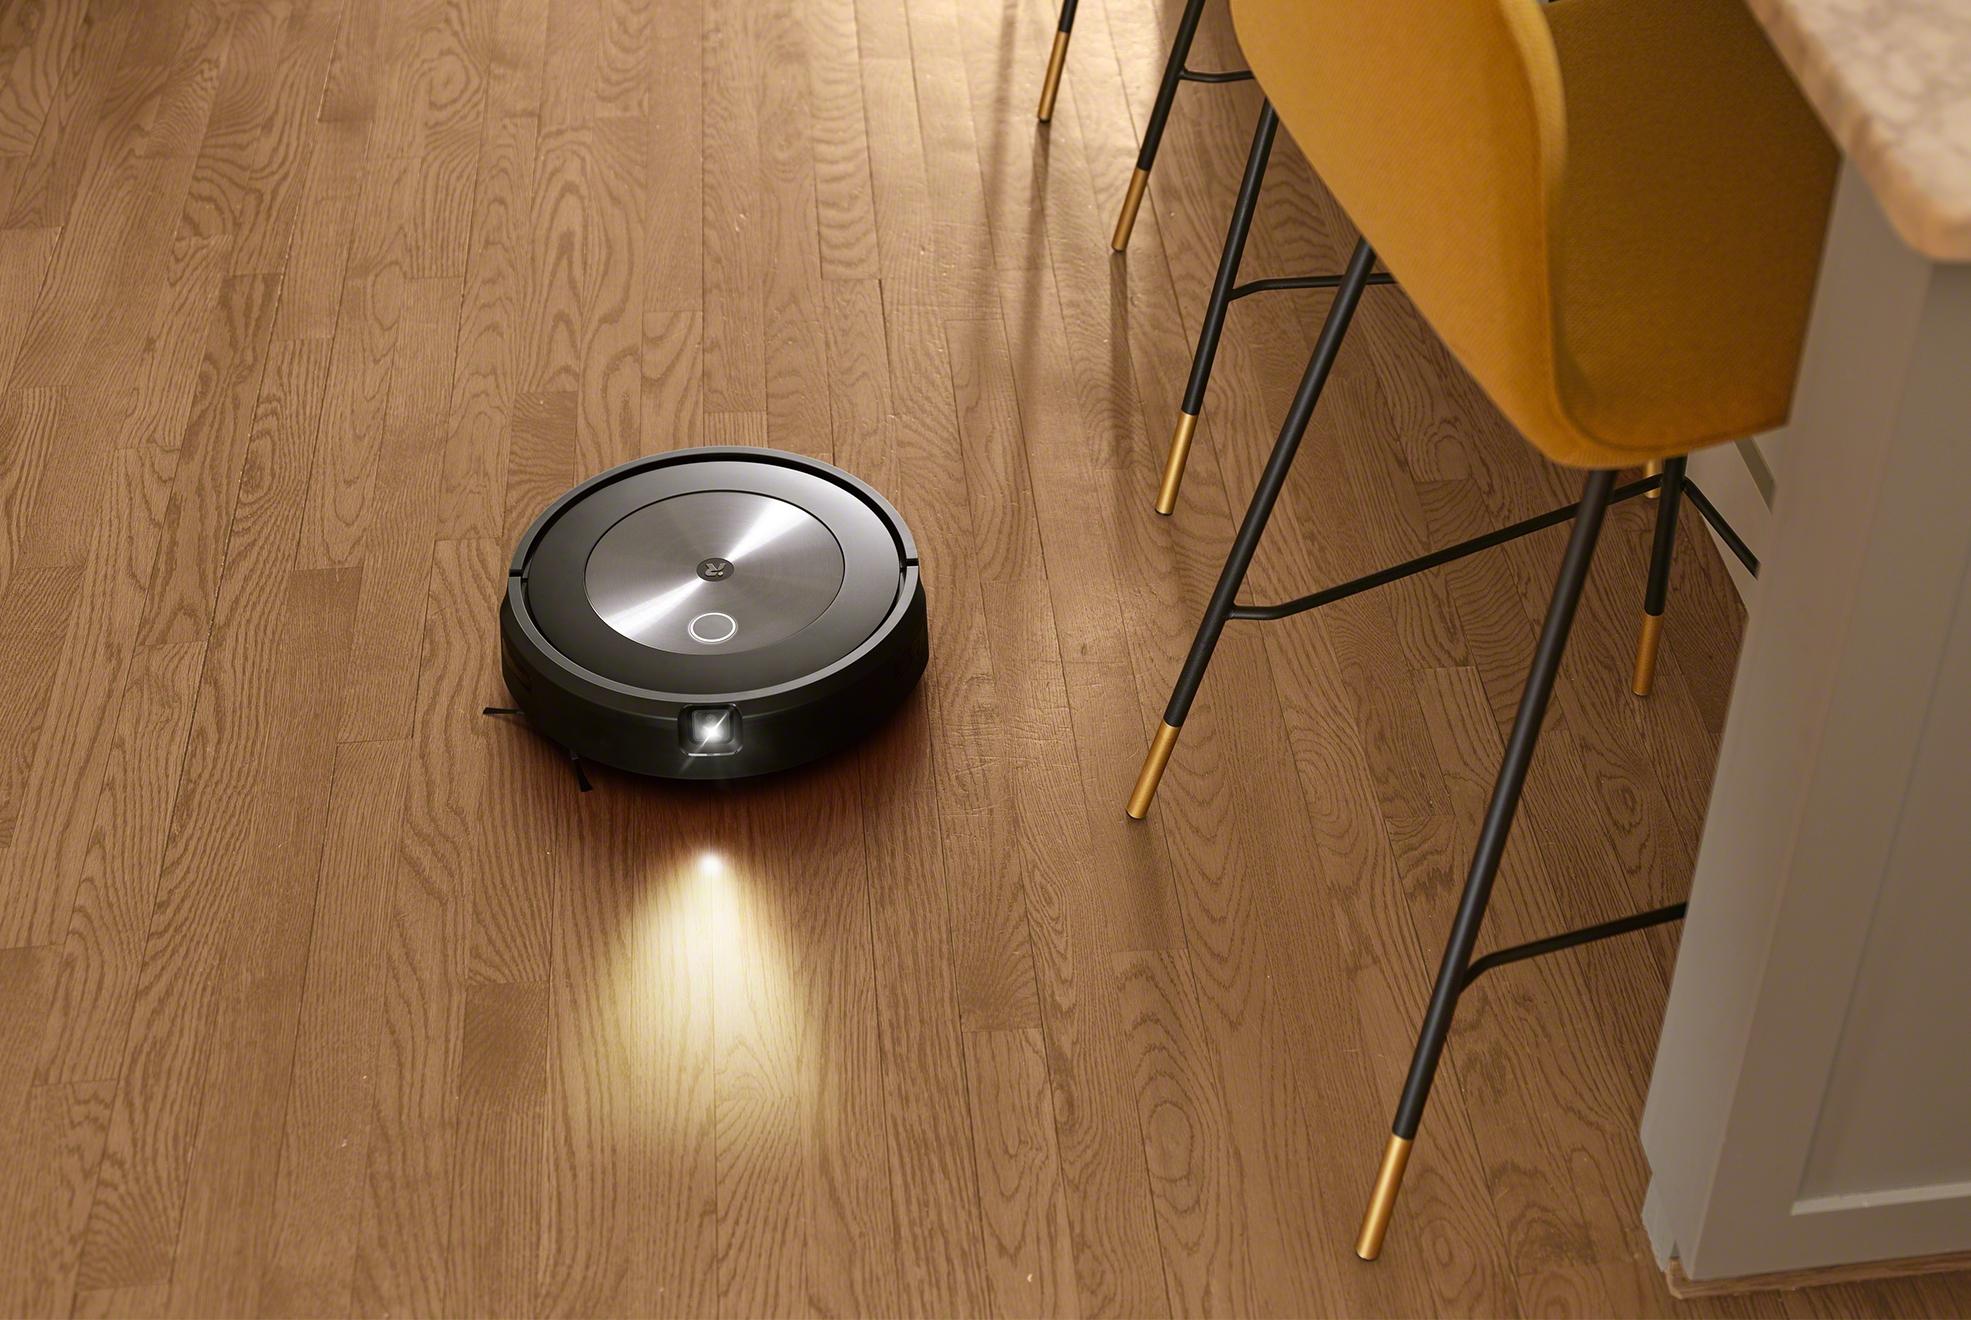 With New Roomba j7, iRobot Wants to Understand Our - Spectrum